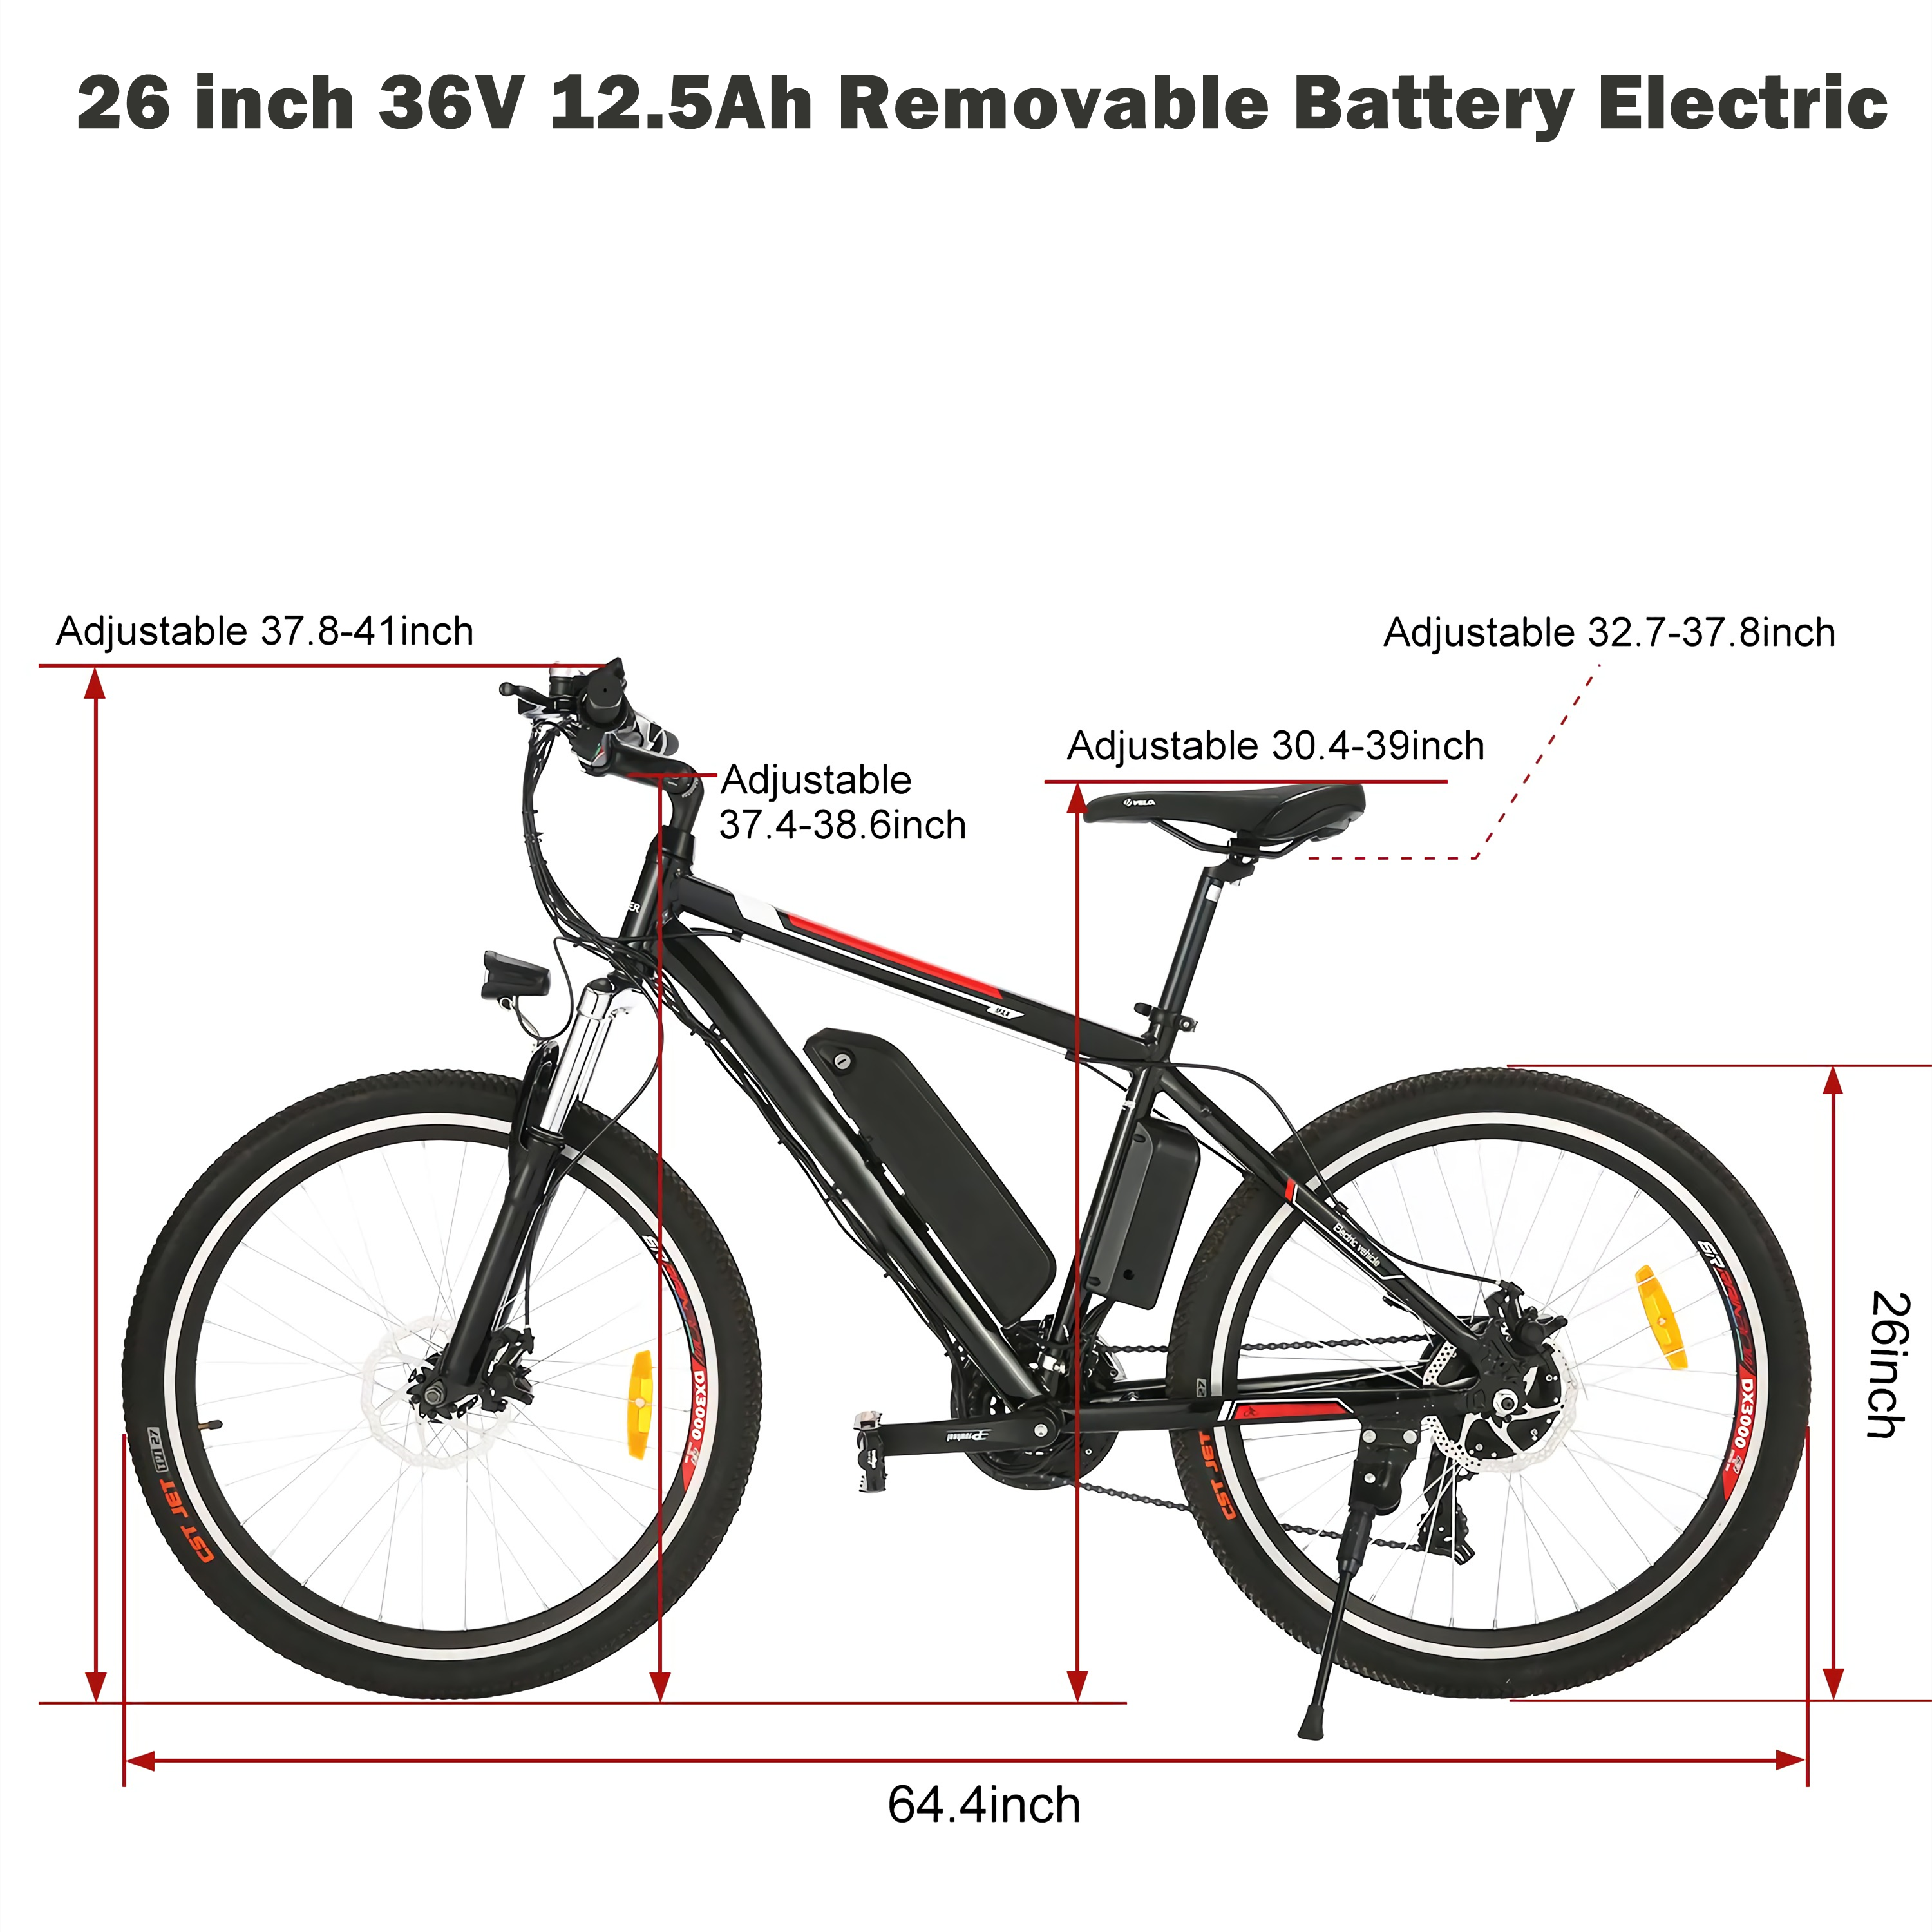 26" 500W Electric Mountain Bike with 12.5Ah Removable Lithium Battery, Commuting E-Bike with Professional 21 Speed Gears for Adults Men